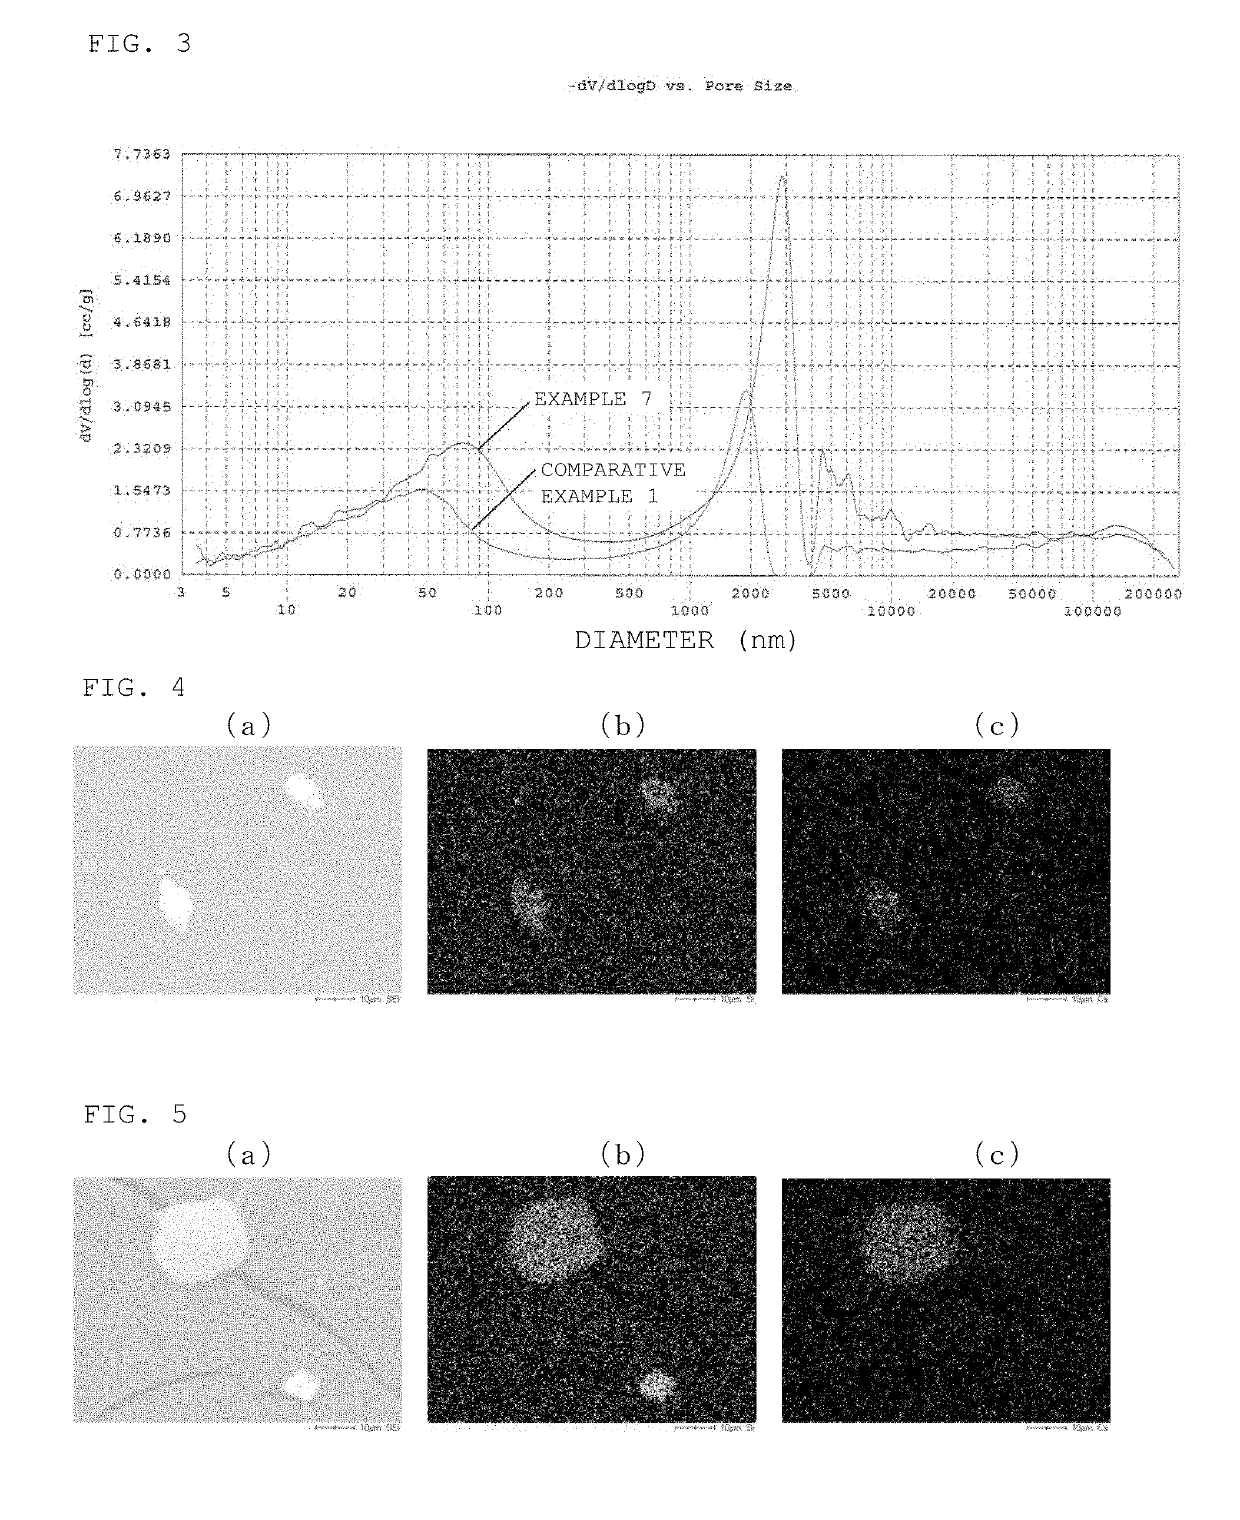 Powdered tobermorite-type calcium silicate-based material and method for producing same